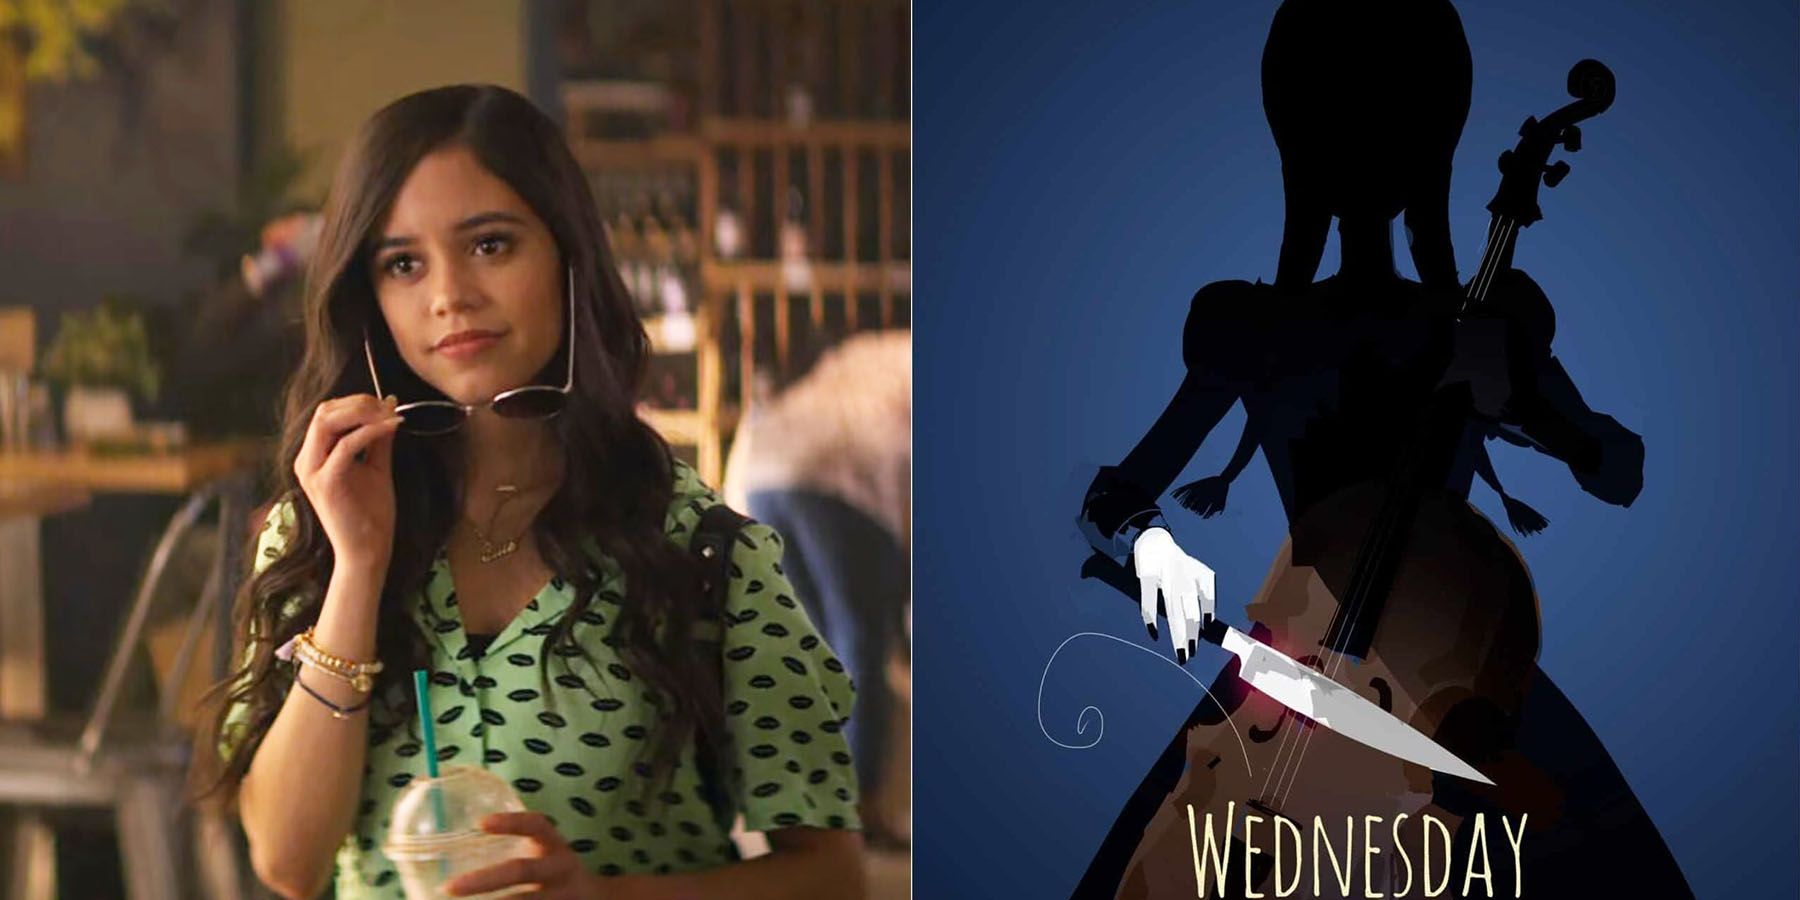 Tim Burton's WEDNESDAY Netflix series has added 10 new cast members,  joining previously announced Jenna Ortega as Wednesday Addams…